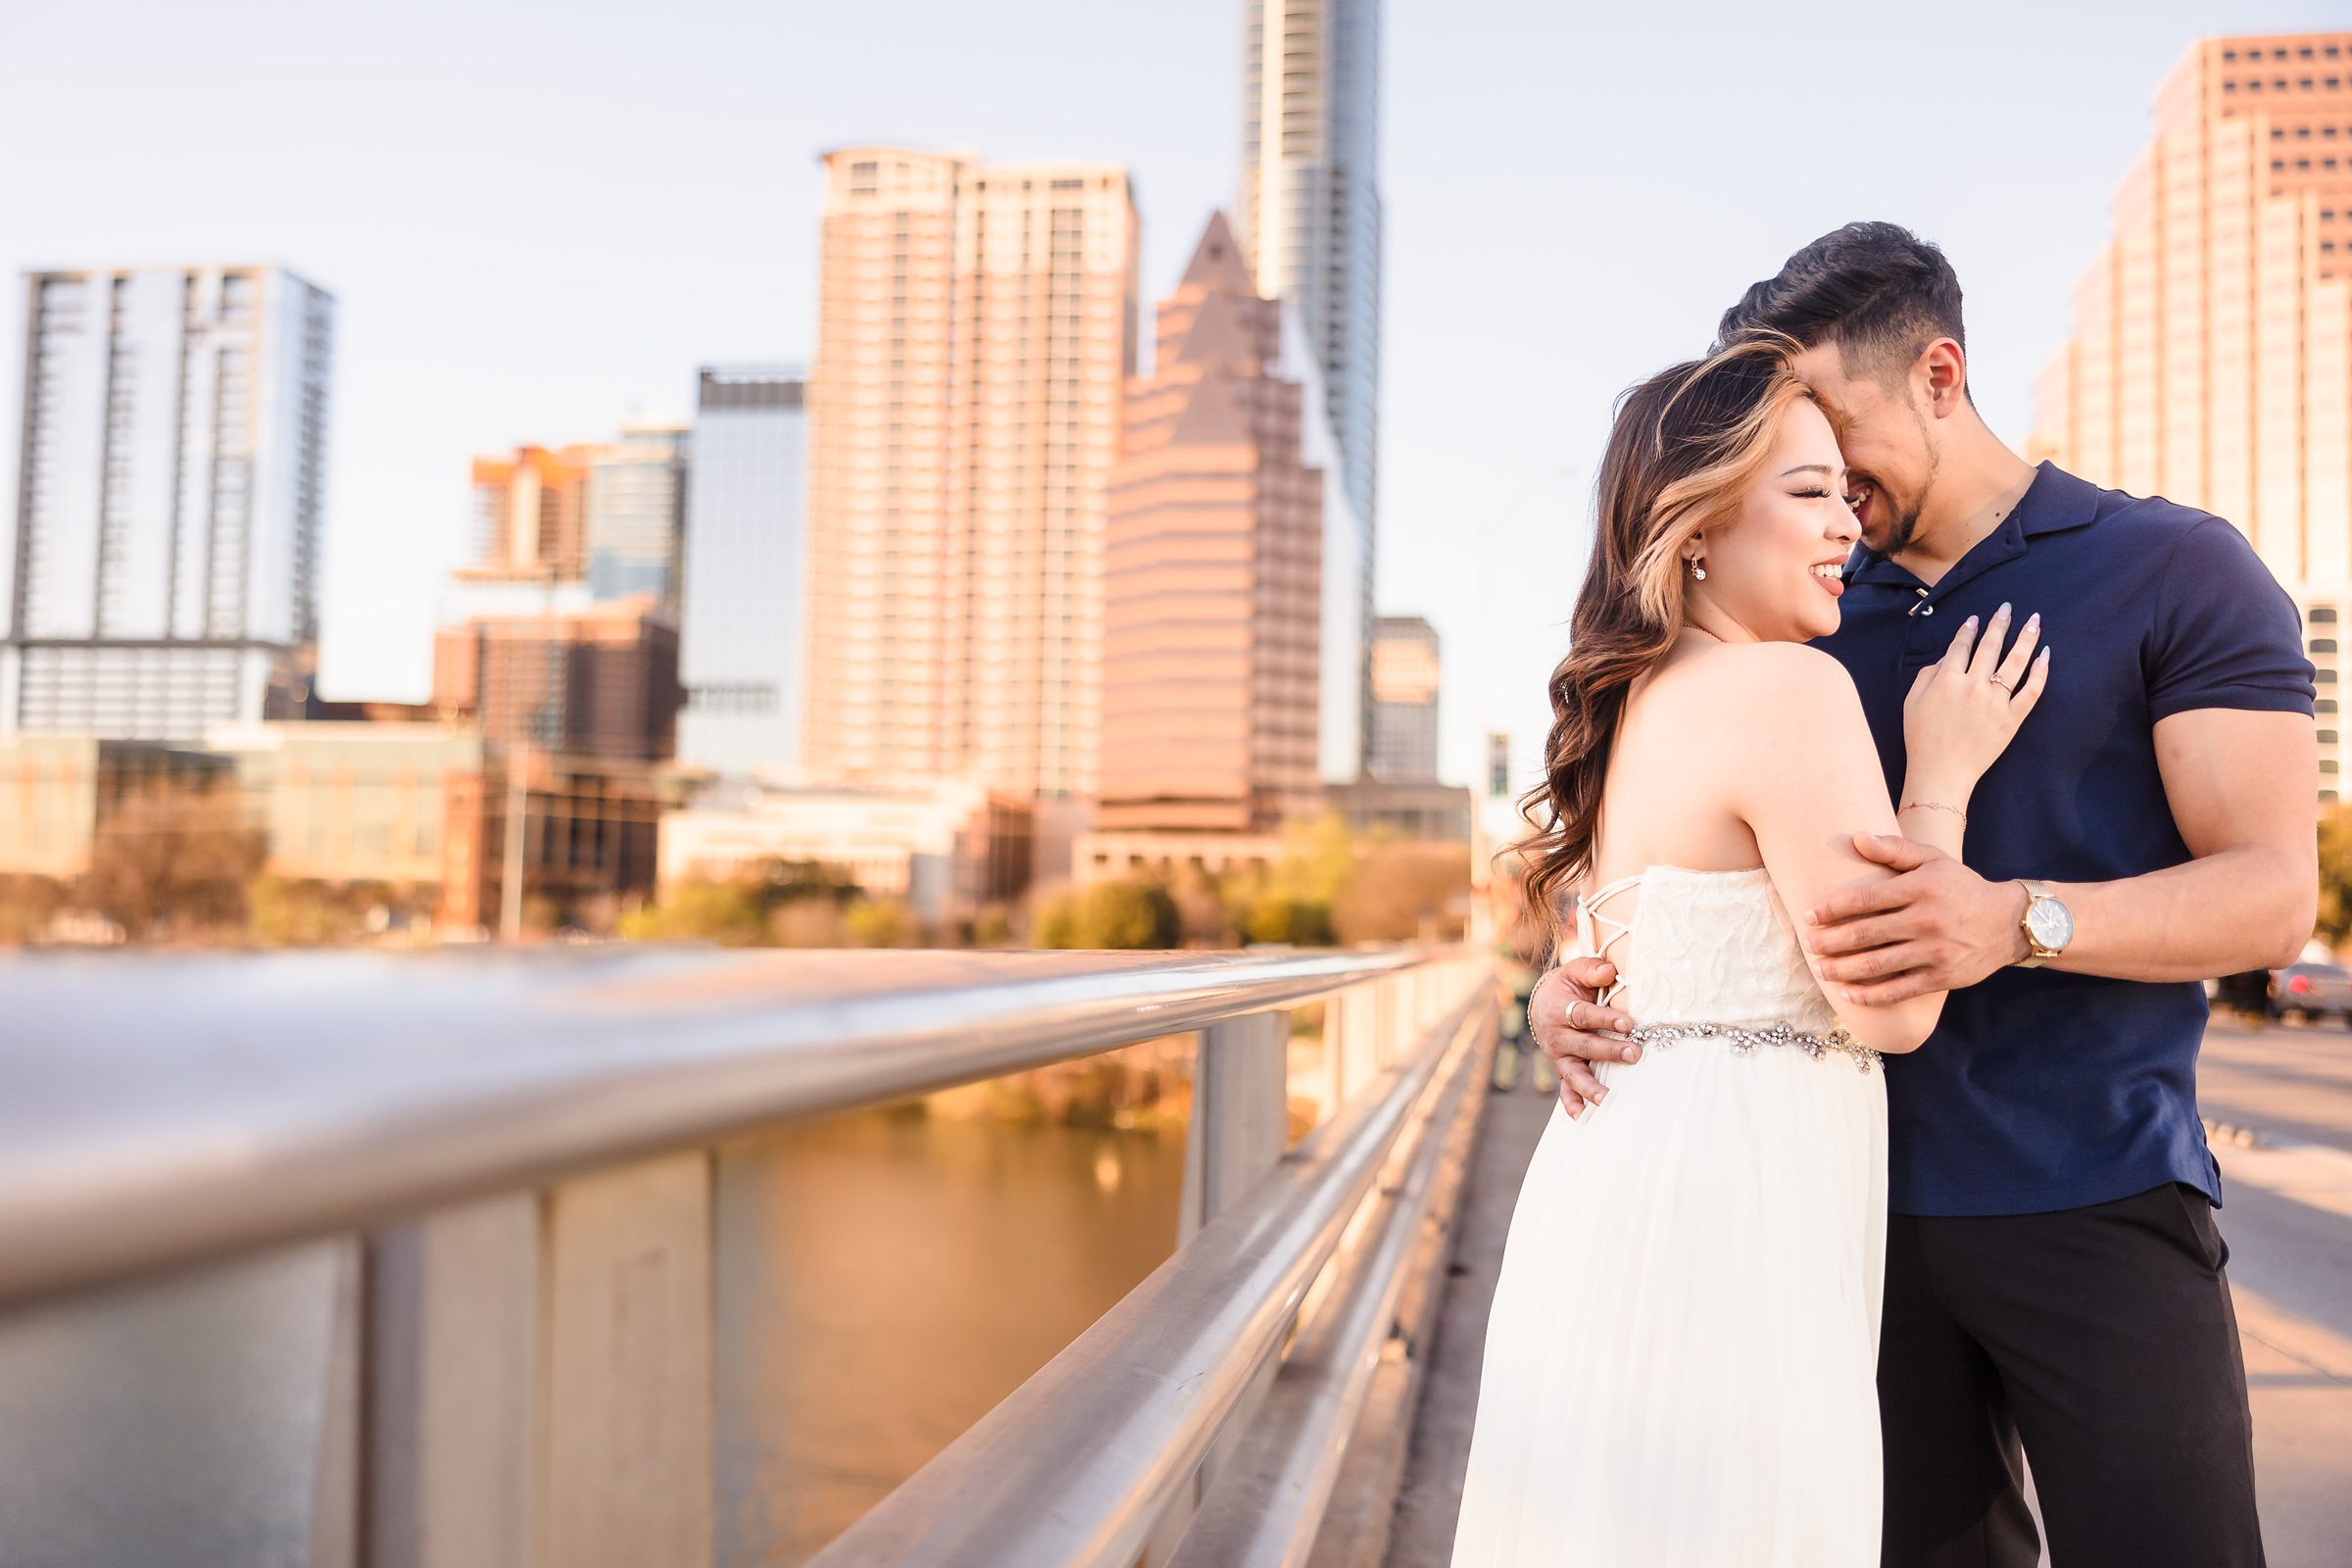 Couple celebrate their relationship in downtown Austin, Texas. Photograph taken by Austin wedding photographers, Joanna and Brett Photography